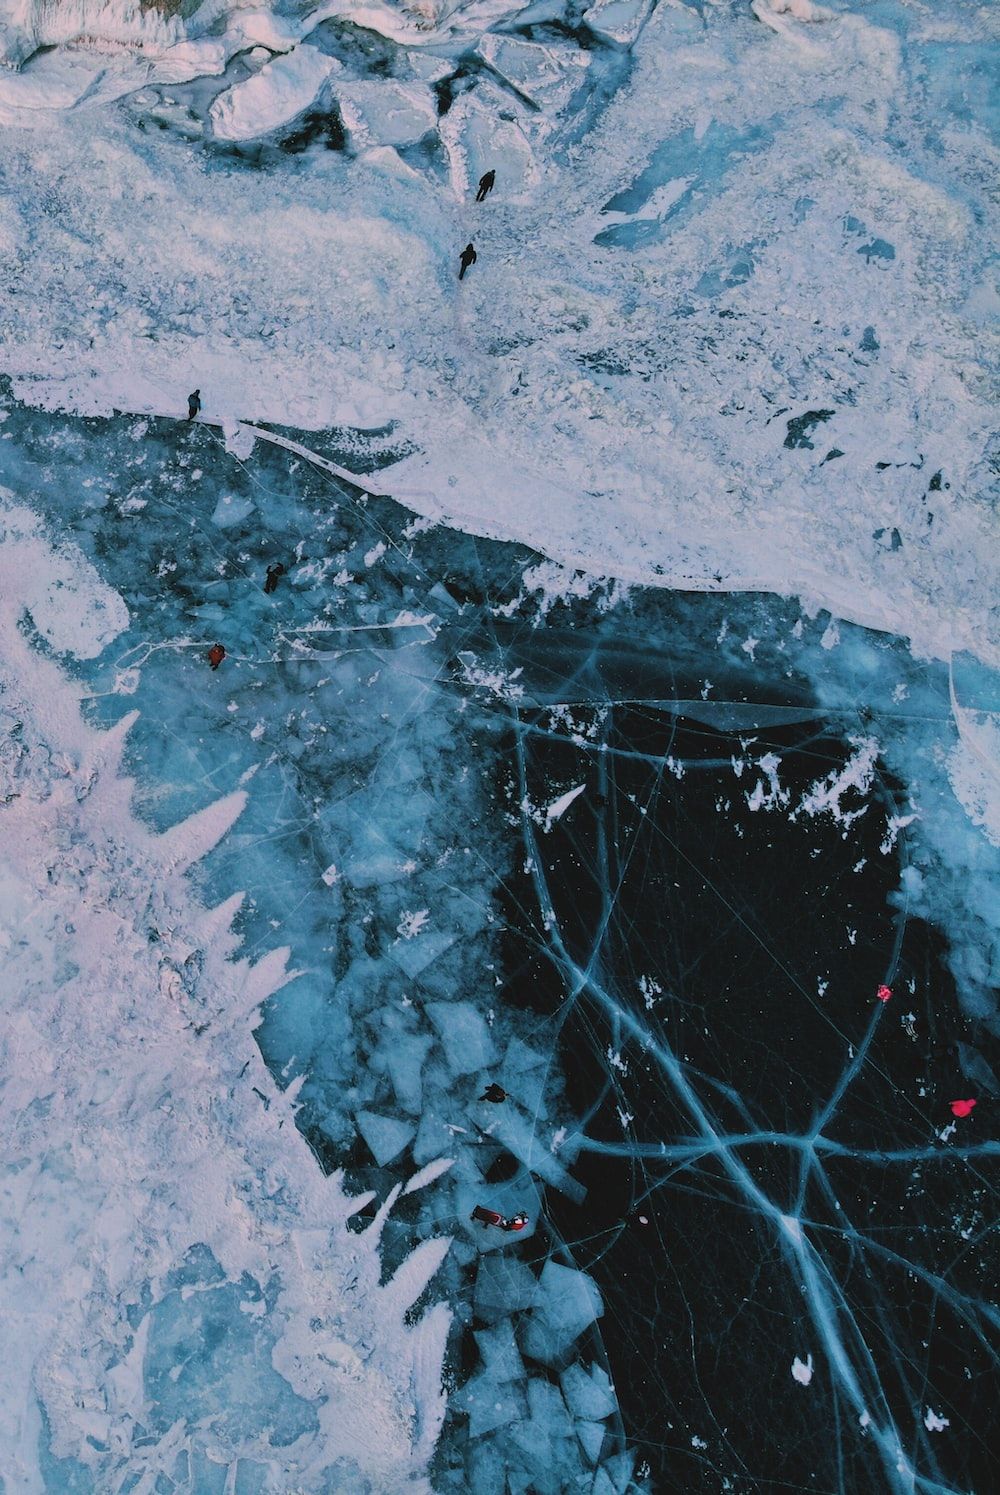 A bird flying over the snowy landscape - Ice